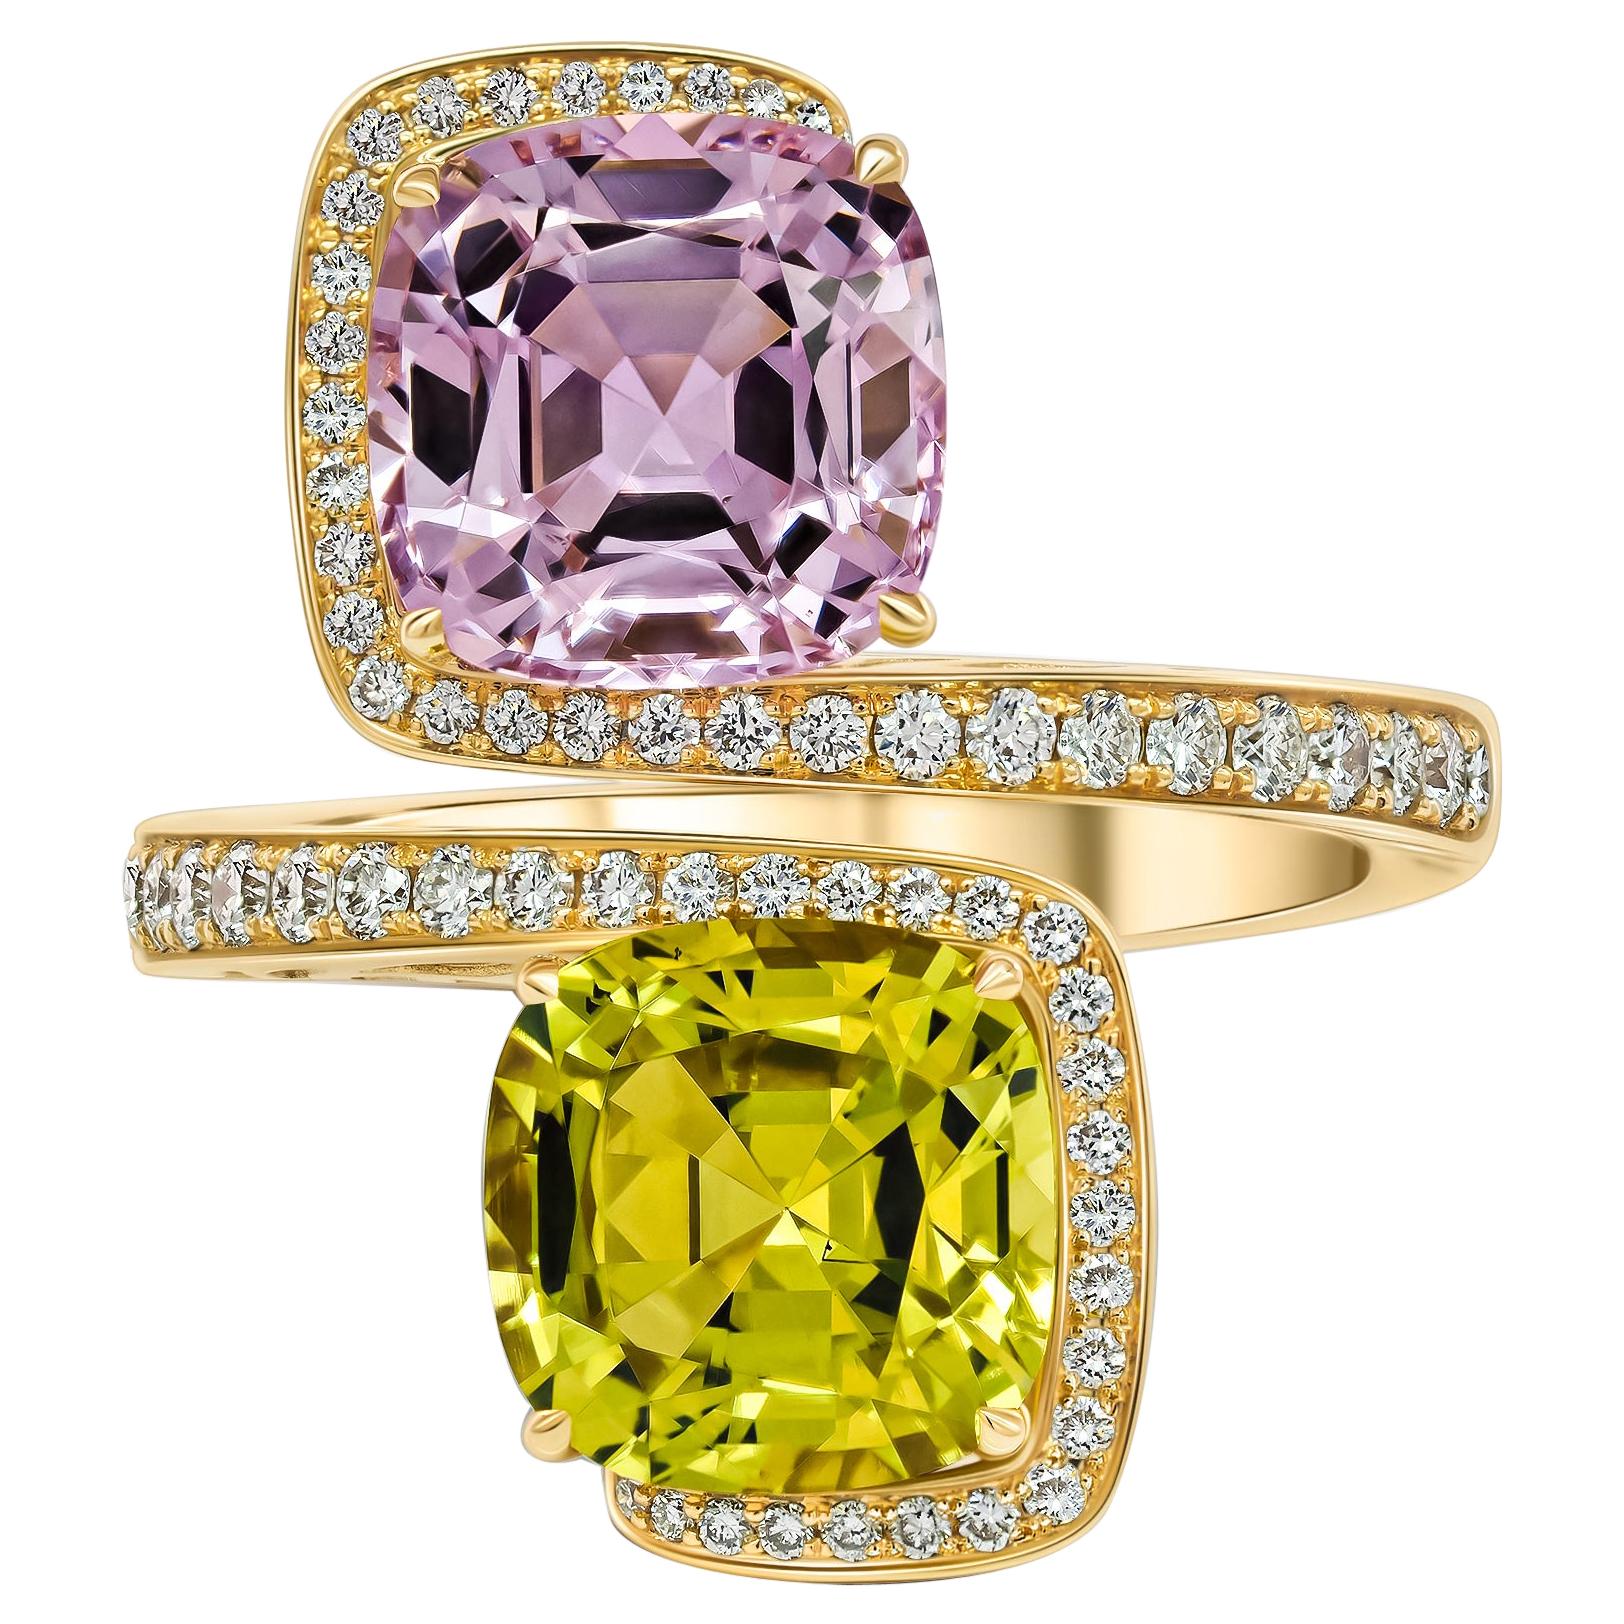 Spinel & Chrysoberyl Cocktail Ring, 18K Yellow Gold and Diamonds Cocktail Ring For Sale